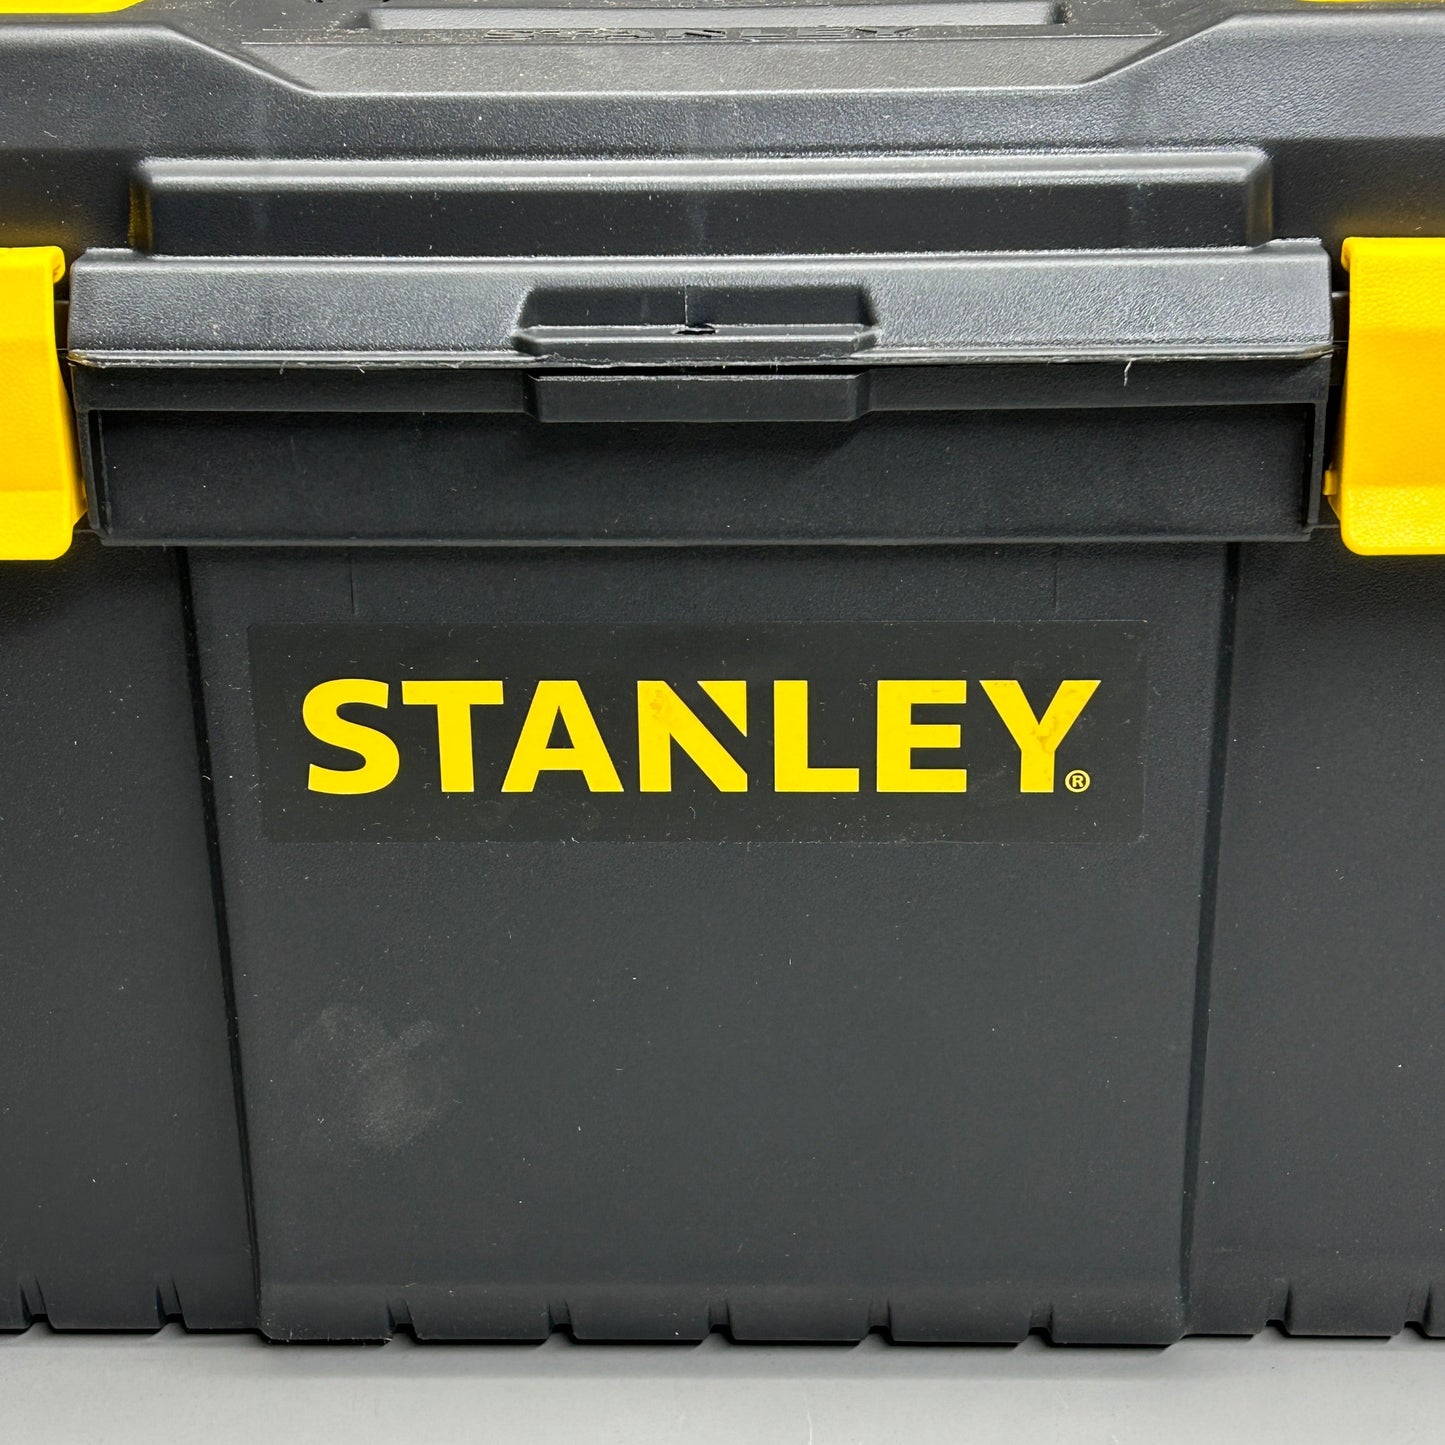 STANLEY 19" Essential Toolbox With Lid Organizers Black/Yellow STST19331 (New)